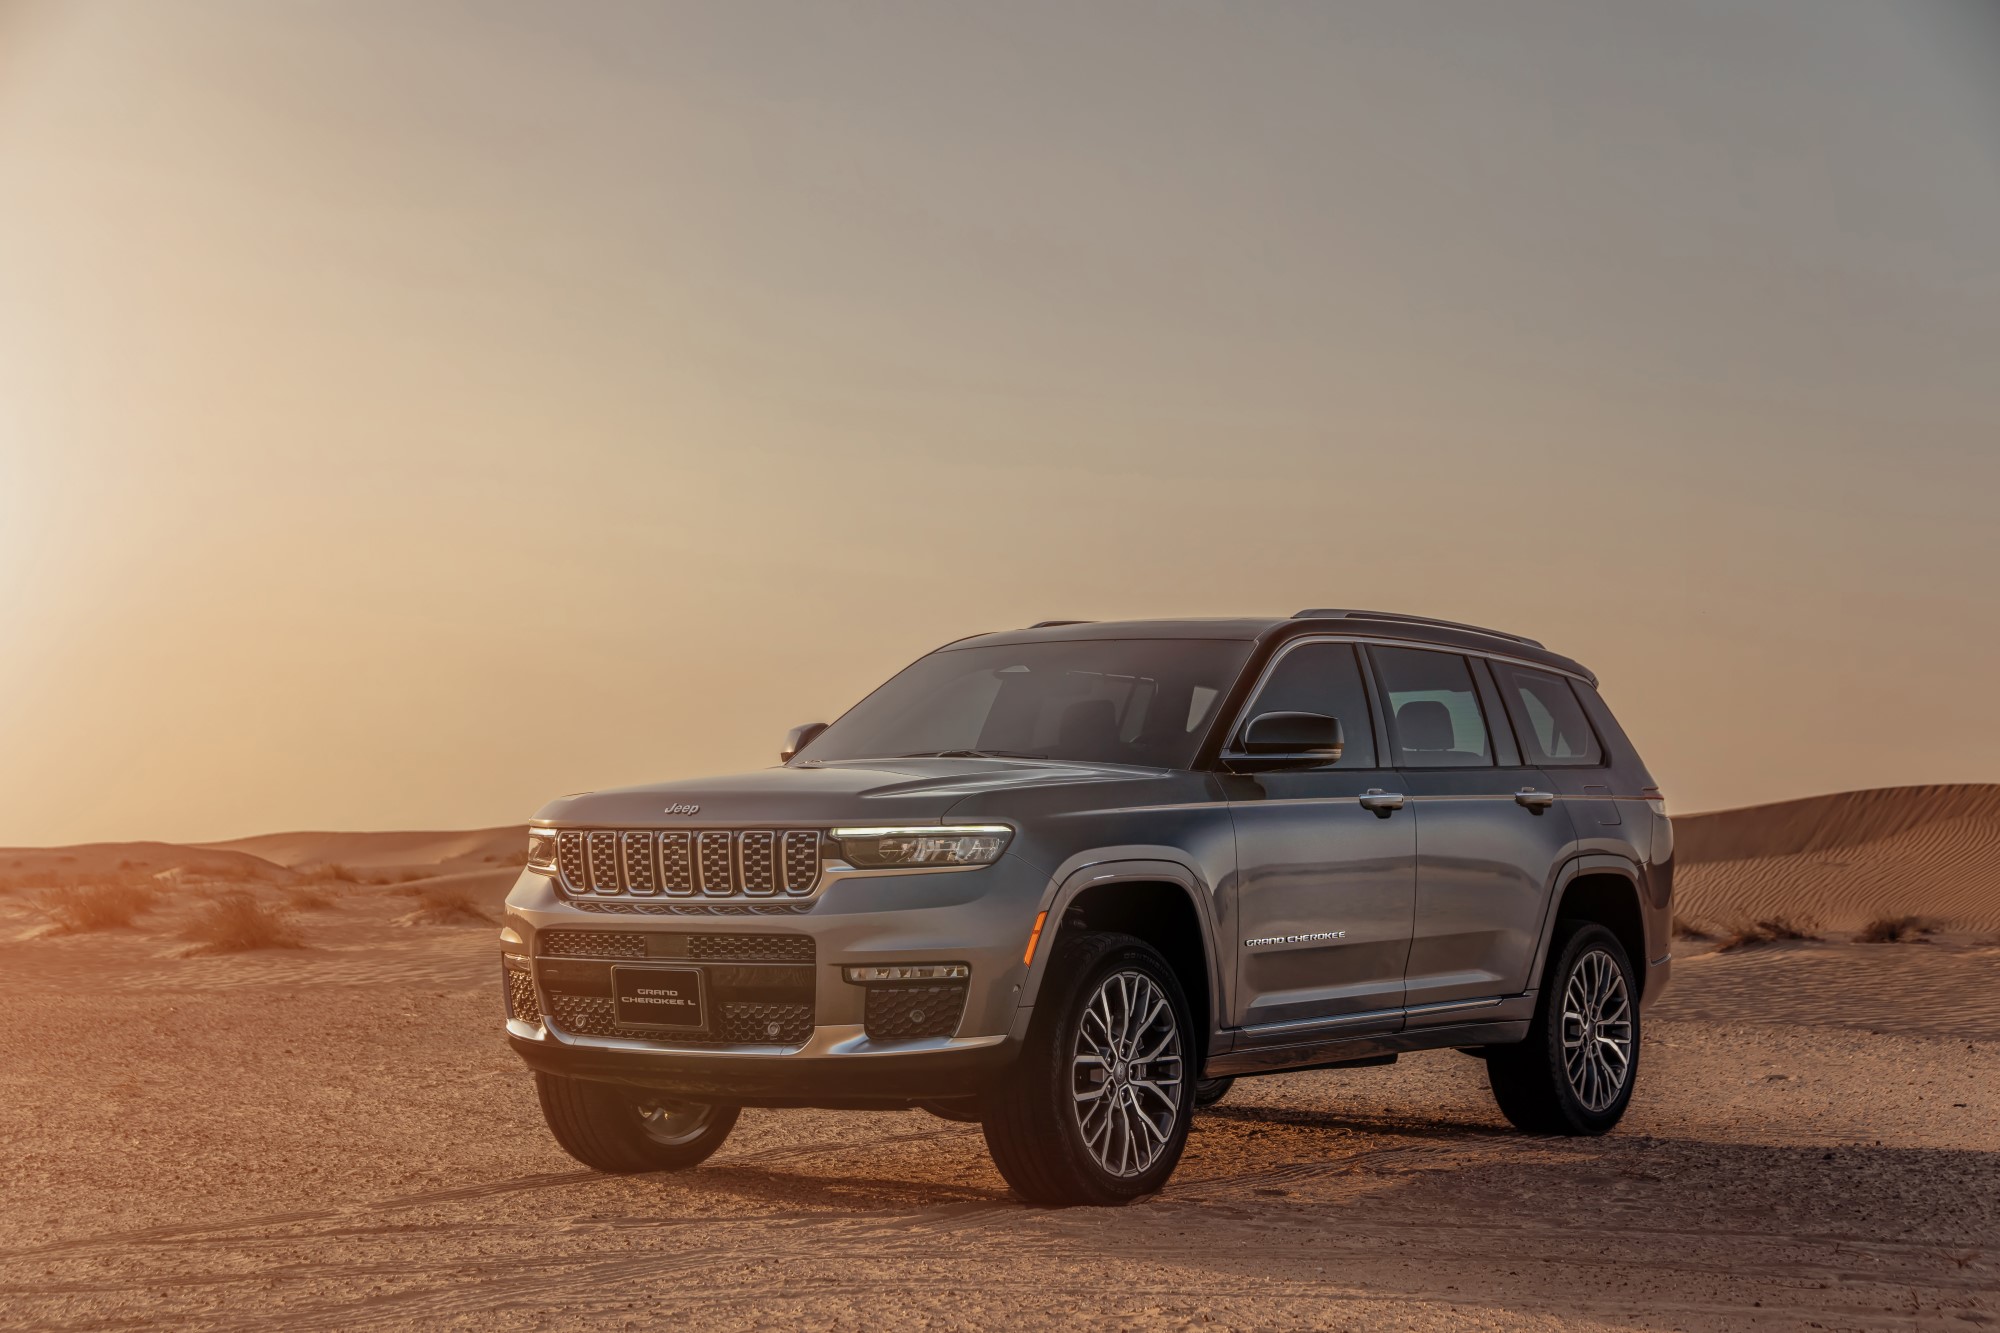 All-New Jeep® Grand Cherokee L Breaks New Ground in the Full-size SUV Segment in the Middle East